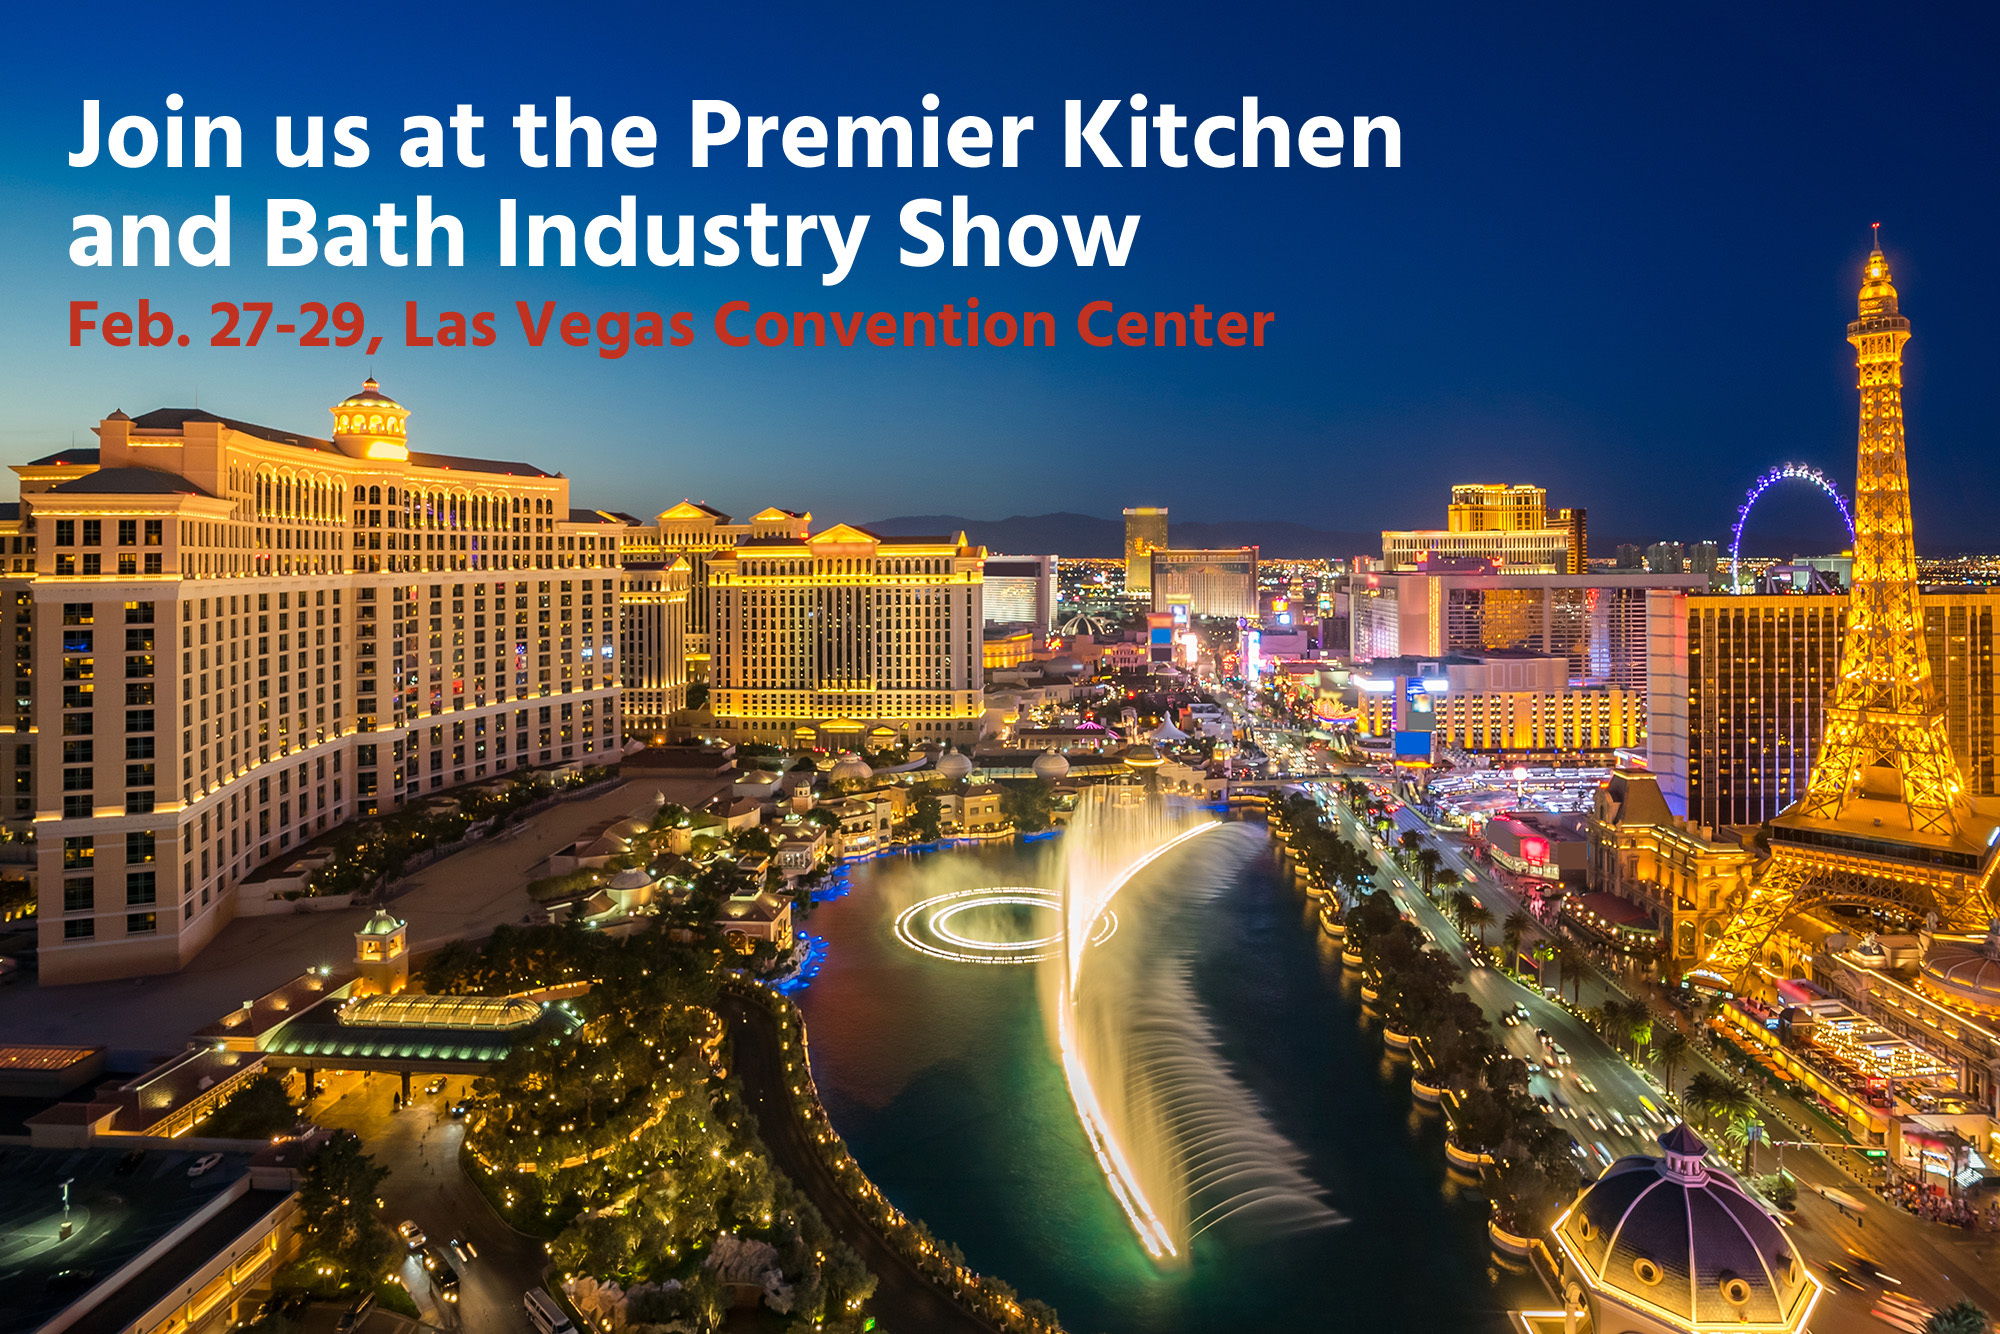 Paperwise Is Attending The Premier Kitchen And Bath Industry Show In Las Vegas This February